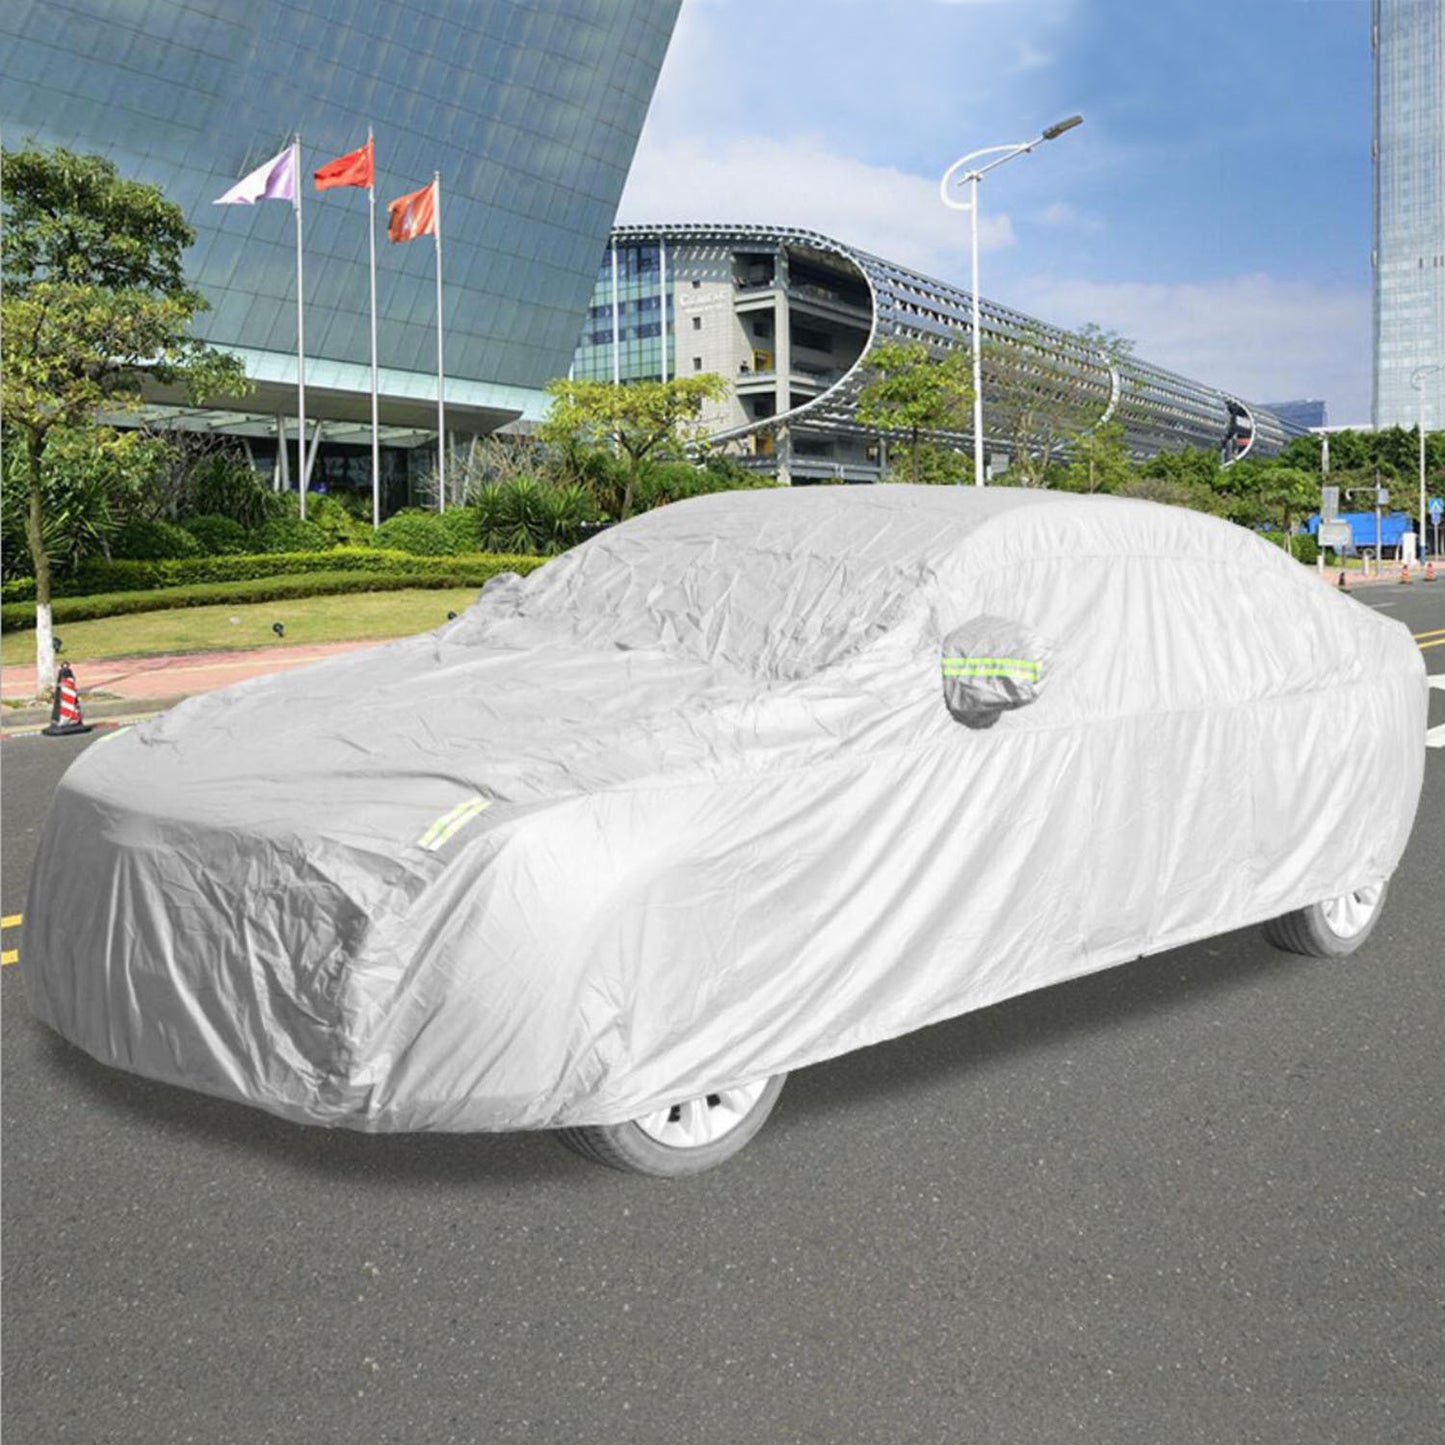 Full Coverage Car Cover Waterproof UV Protection Automotive Cover